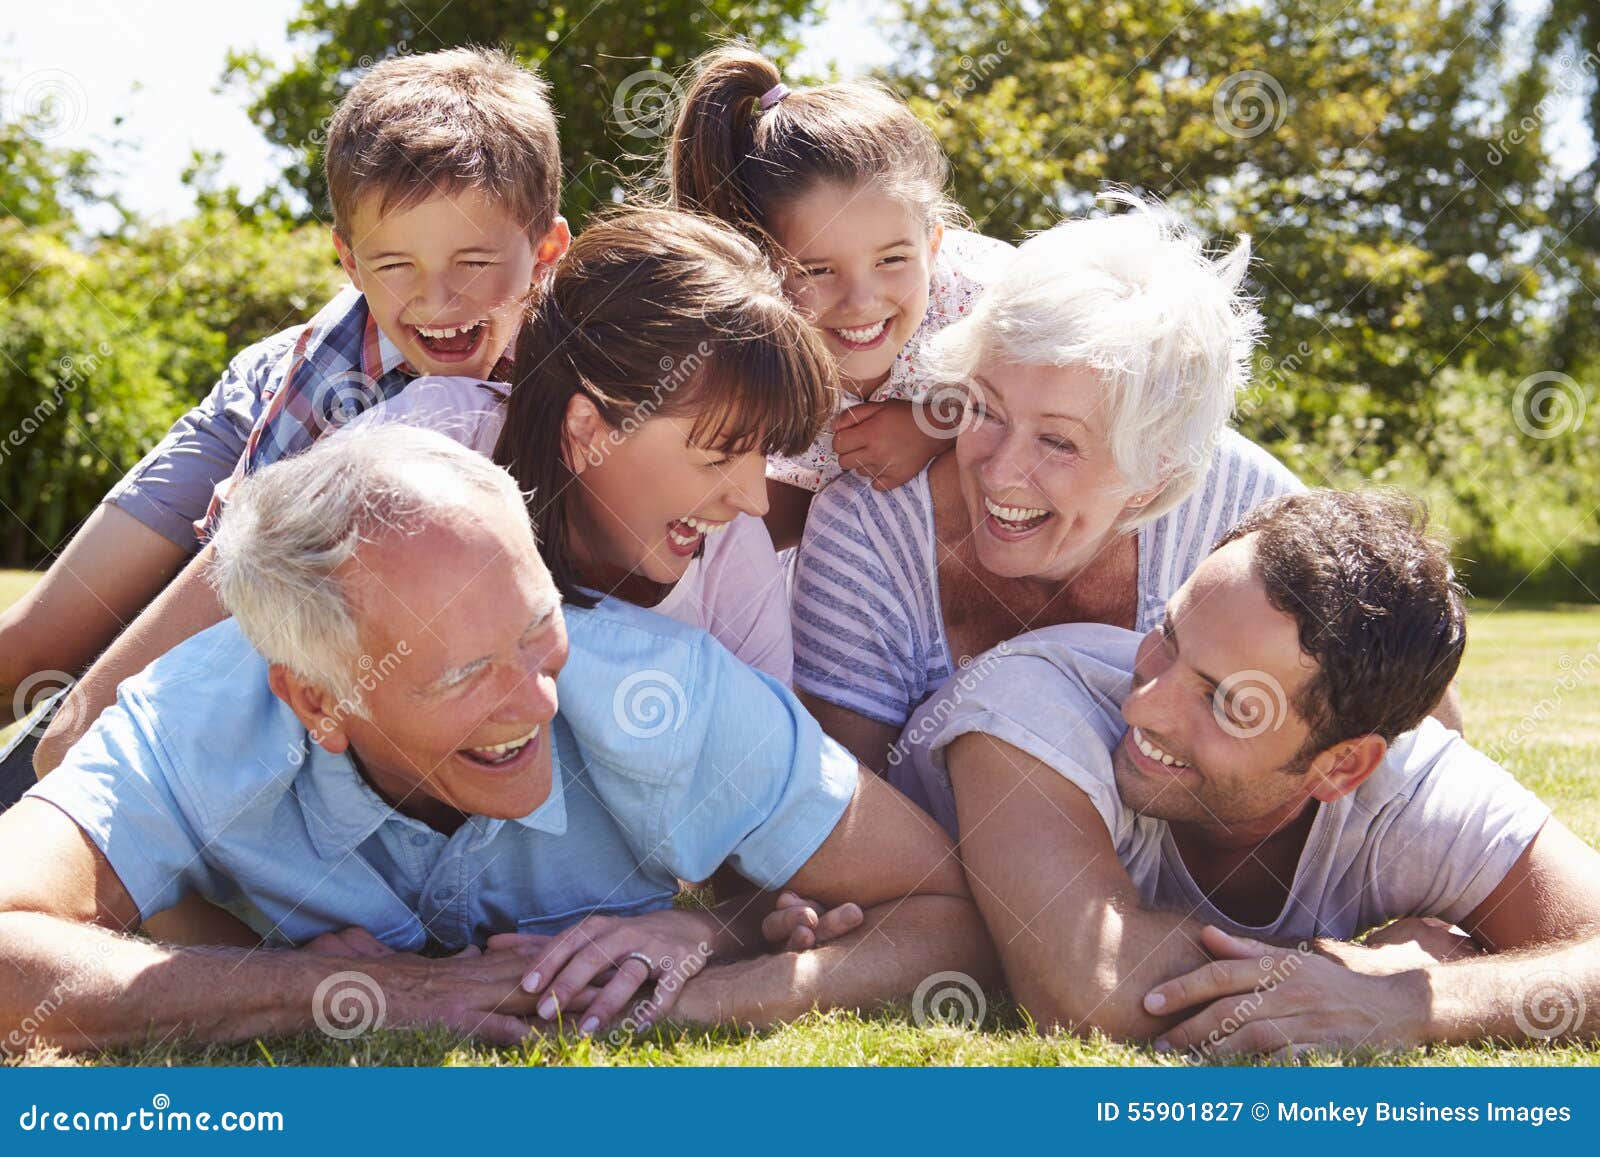 multi generation family piled up in garden together